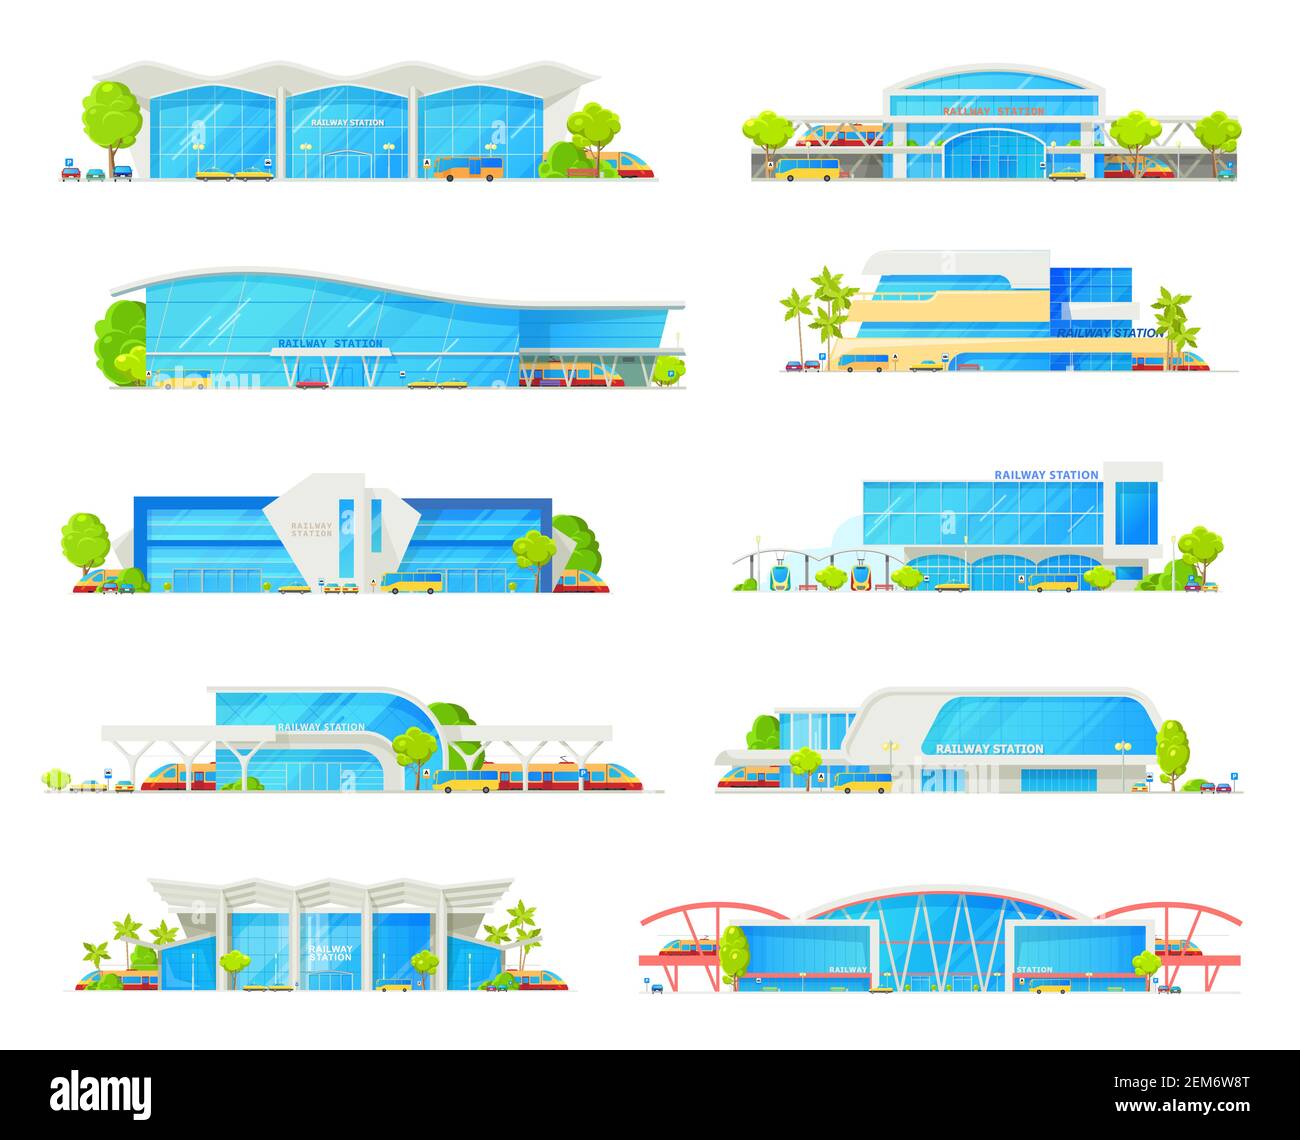 Railway station building vector icons with trains, track platforms and rail bridge. Railroad transport passenger terminals and depot with locomotives, Stock Vector